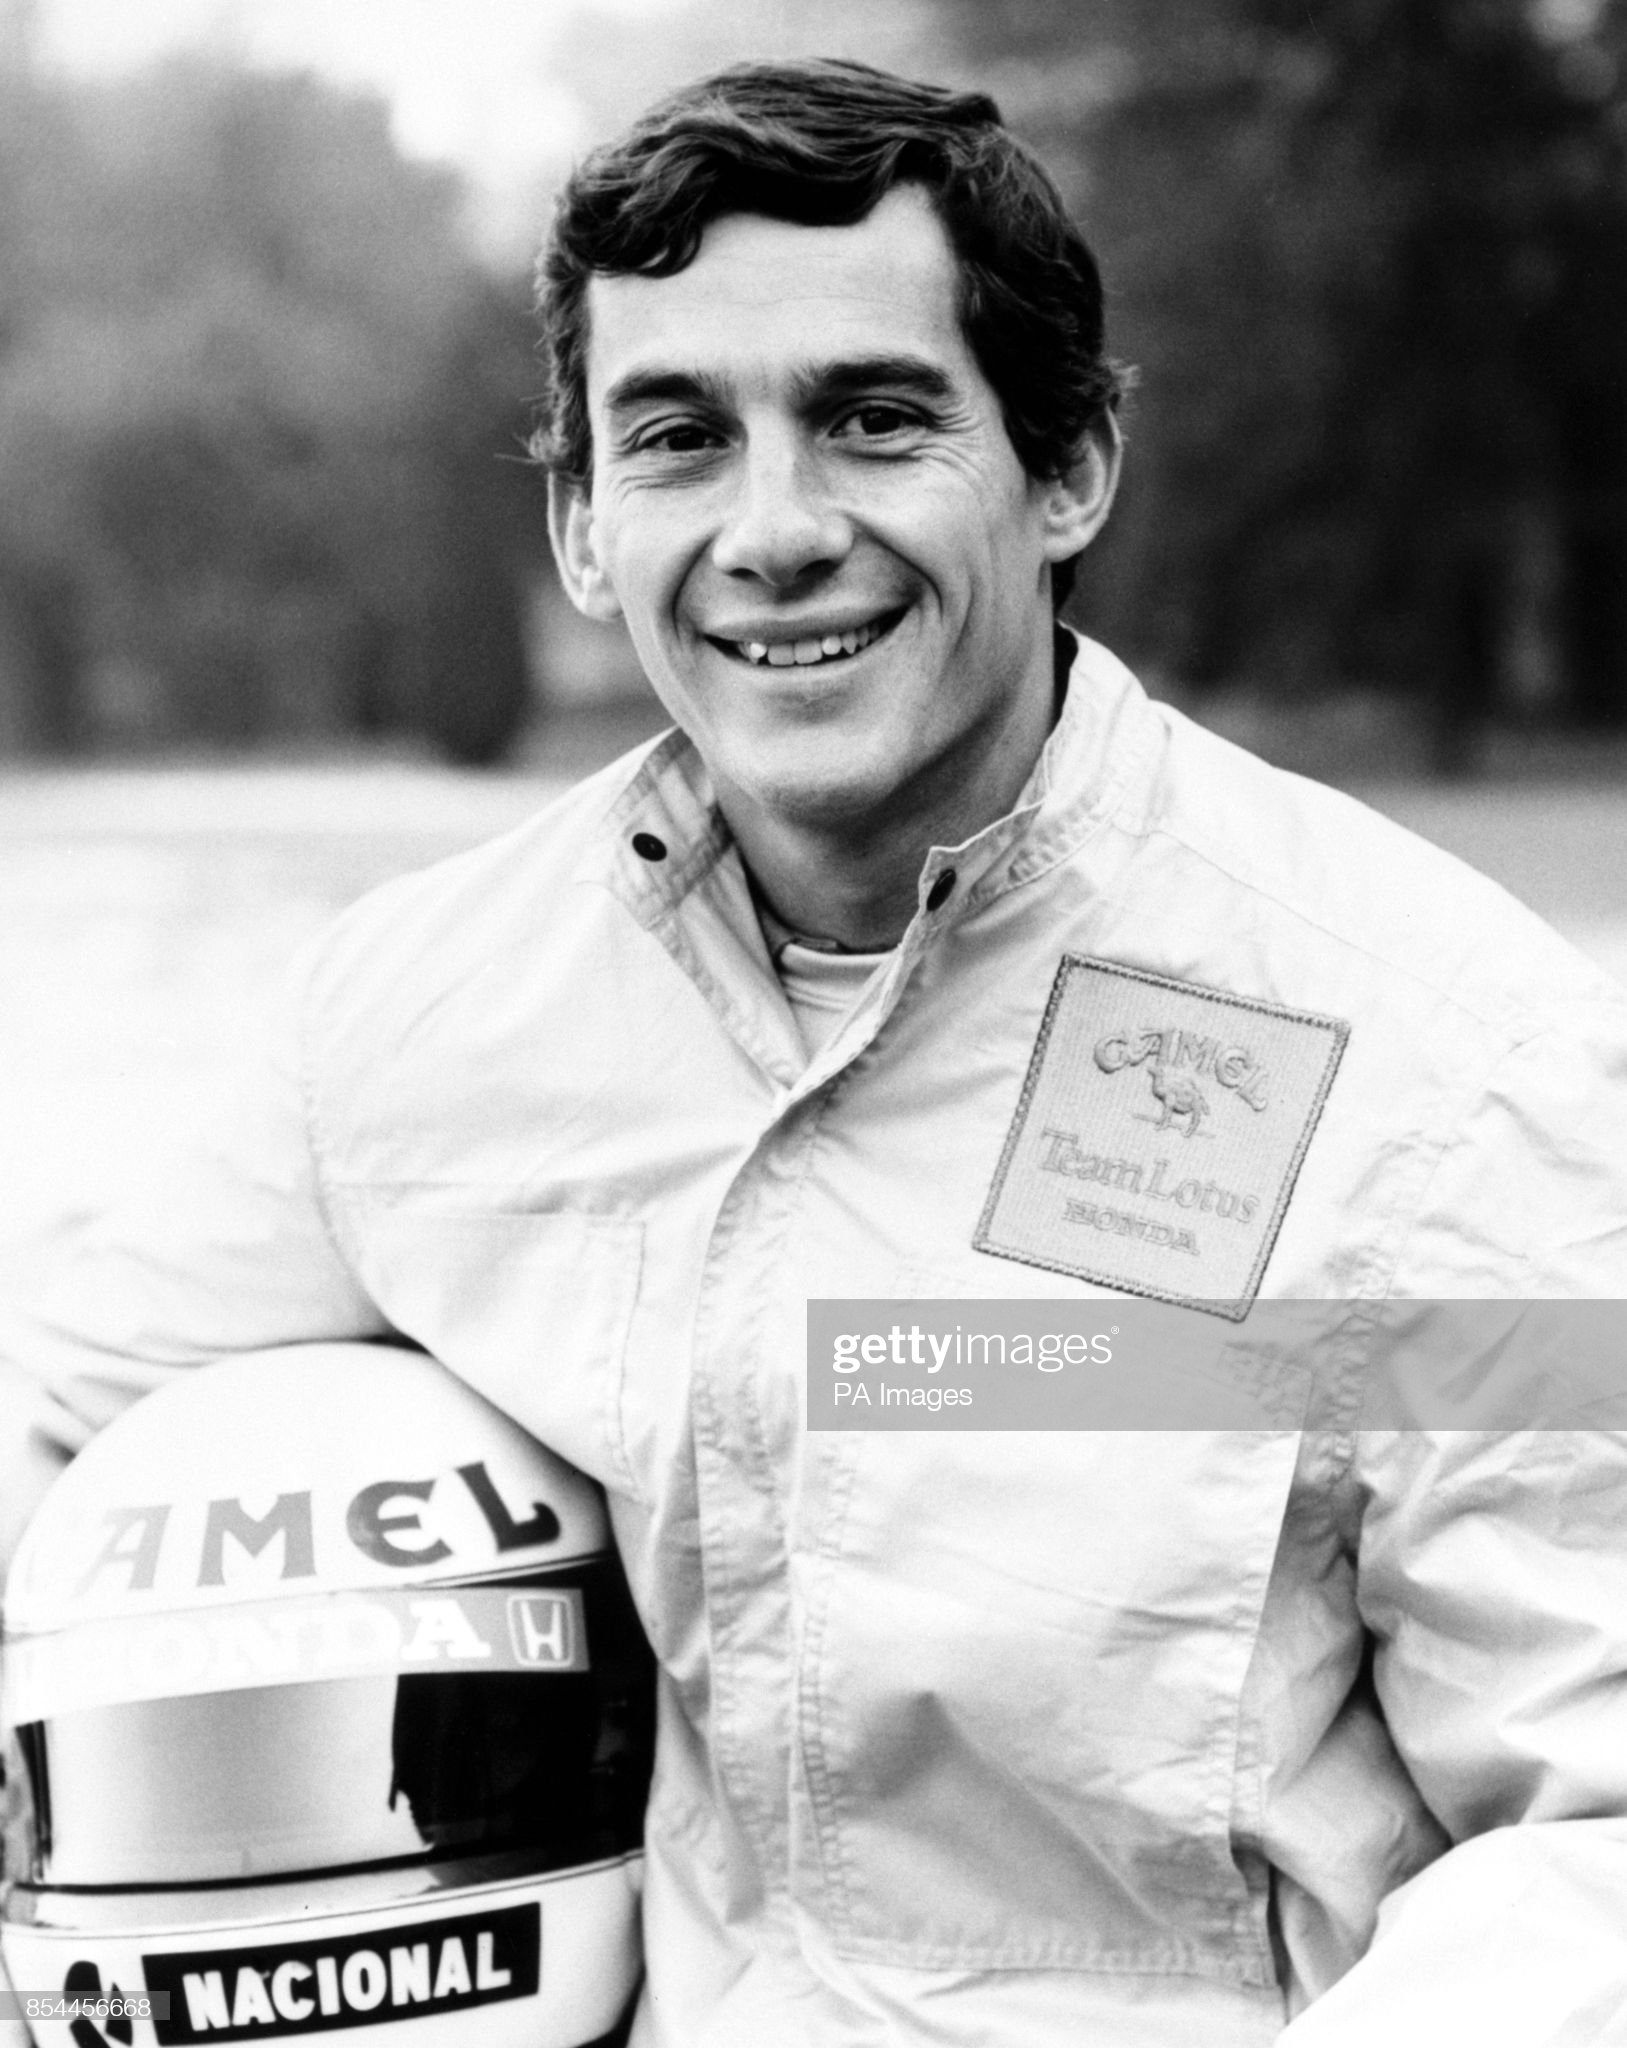 Ayrton Senna, 27, who is again driving for Lotus this season under their new sponsor 'Camel Cigarettes' and with new engines by Honda, on 24 July 1987. 